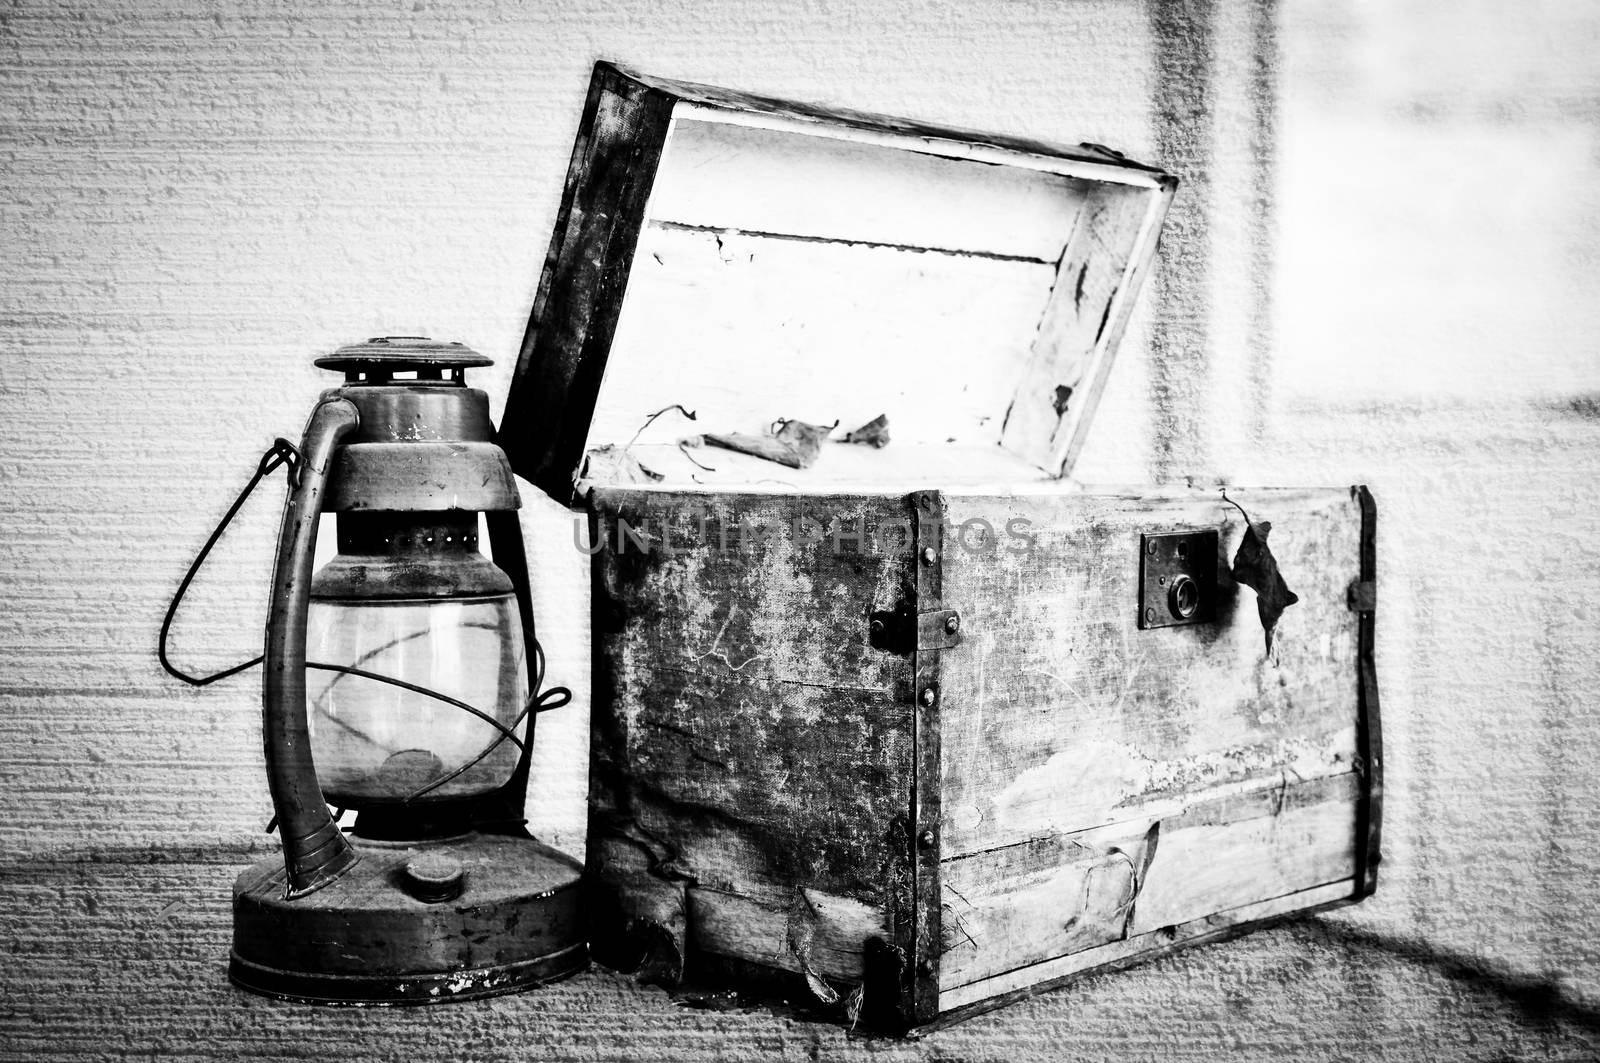 Old Chest And Lantern In Black And White by rcarner